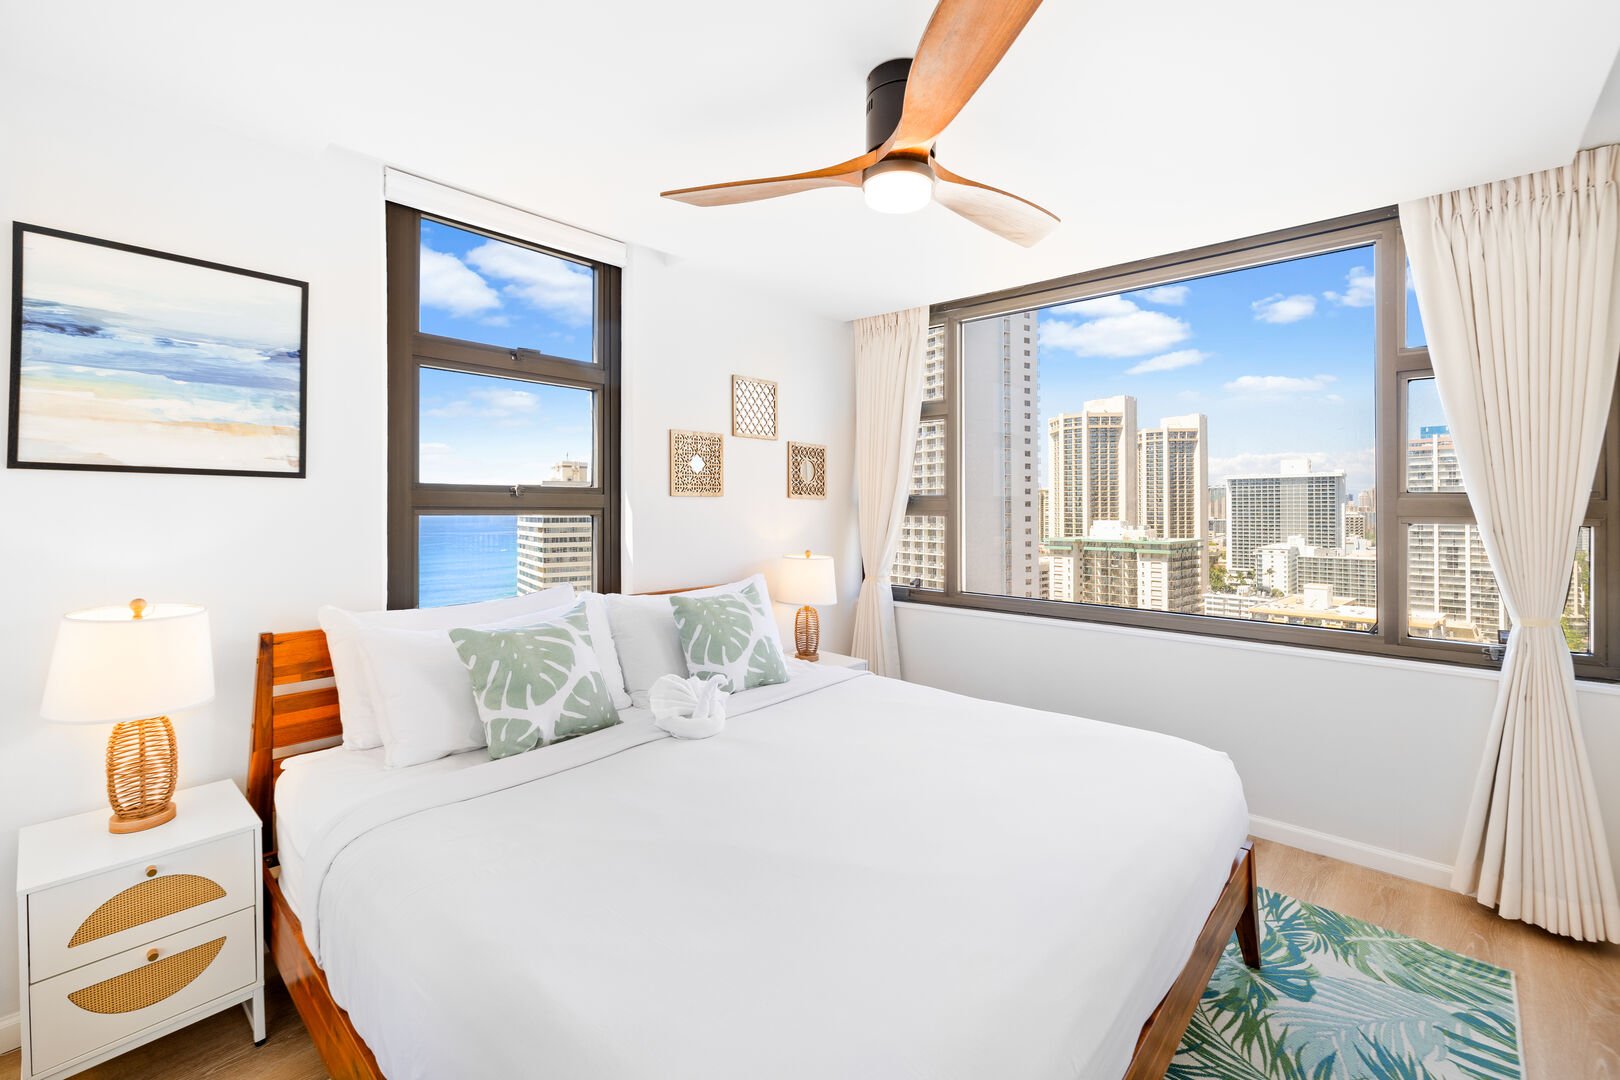 Relax in your bedroom with a king-size bed, ceiling fan, and enjoy the beautiful views from your window!